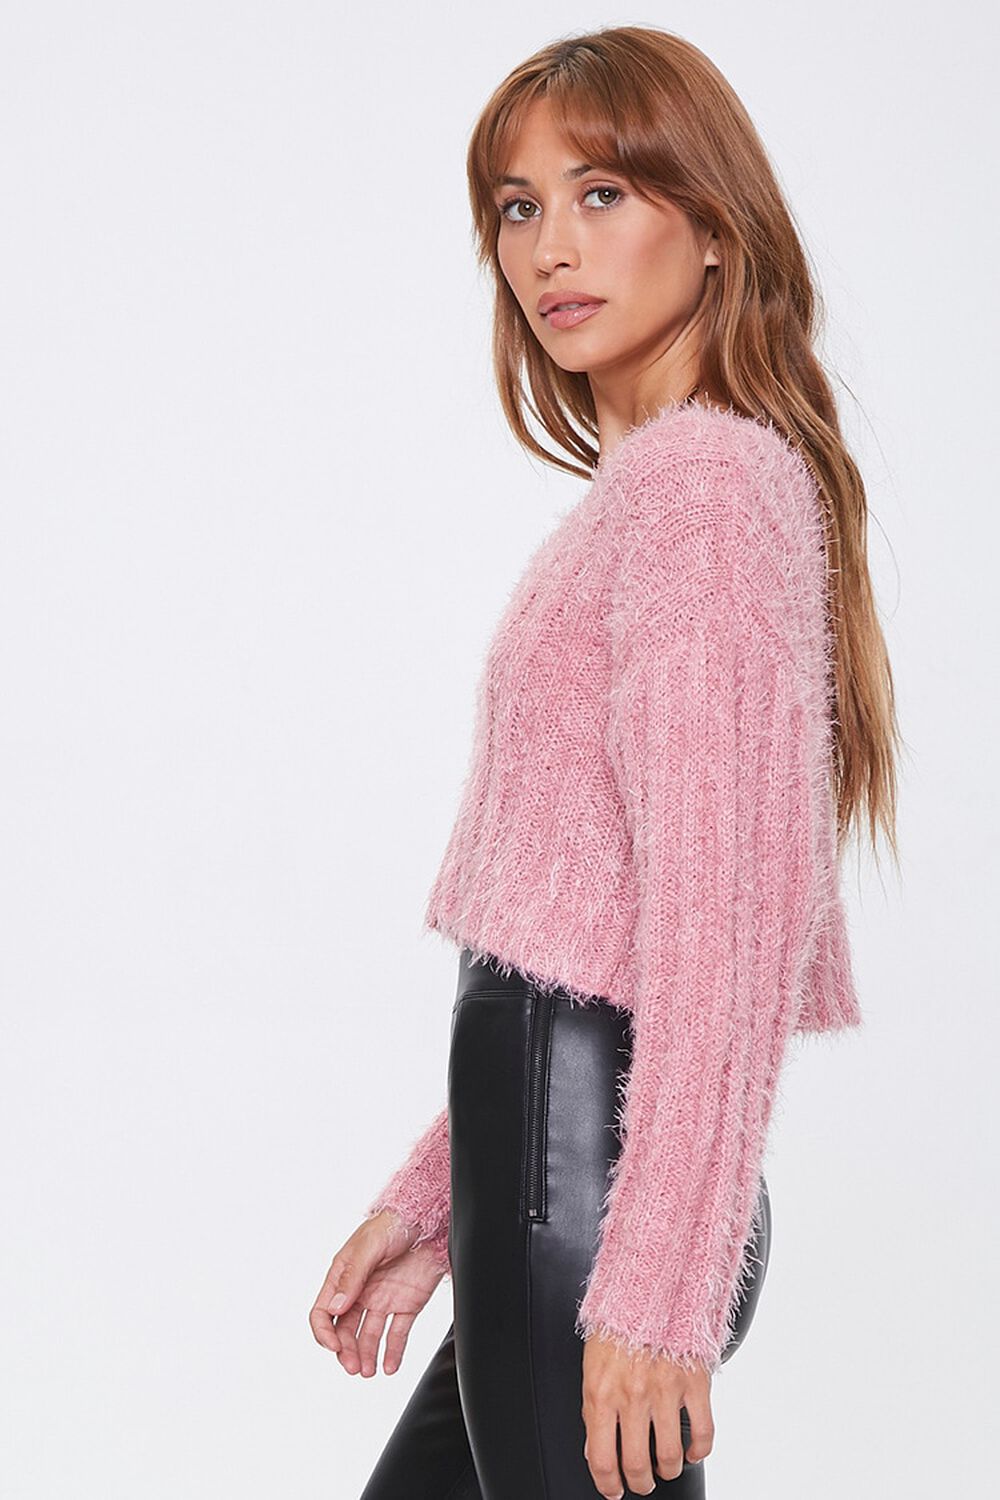 ROSE Fuzzy Knit Ribbed Sweater, image 2